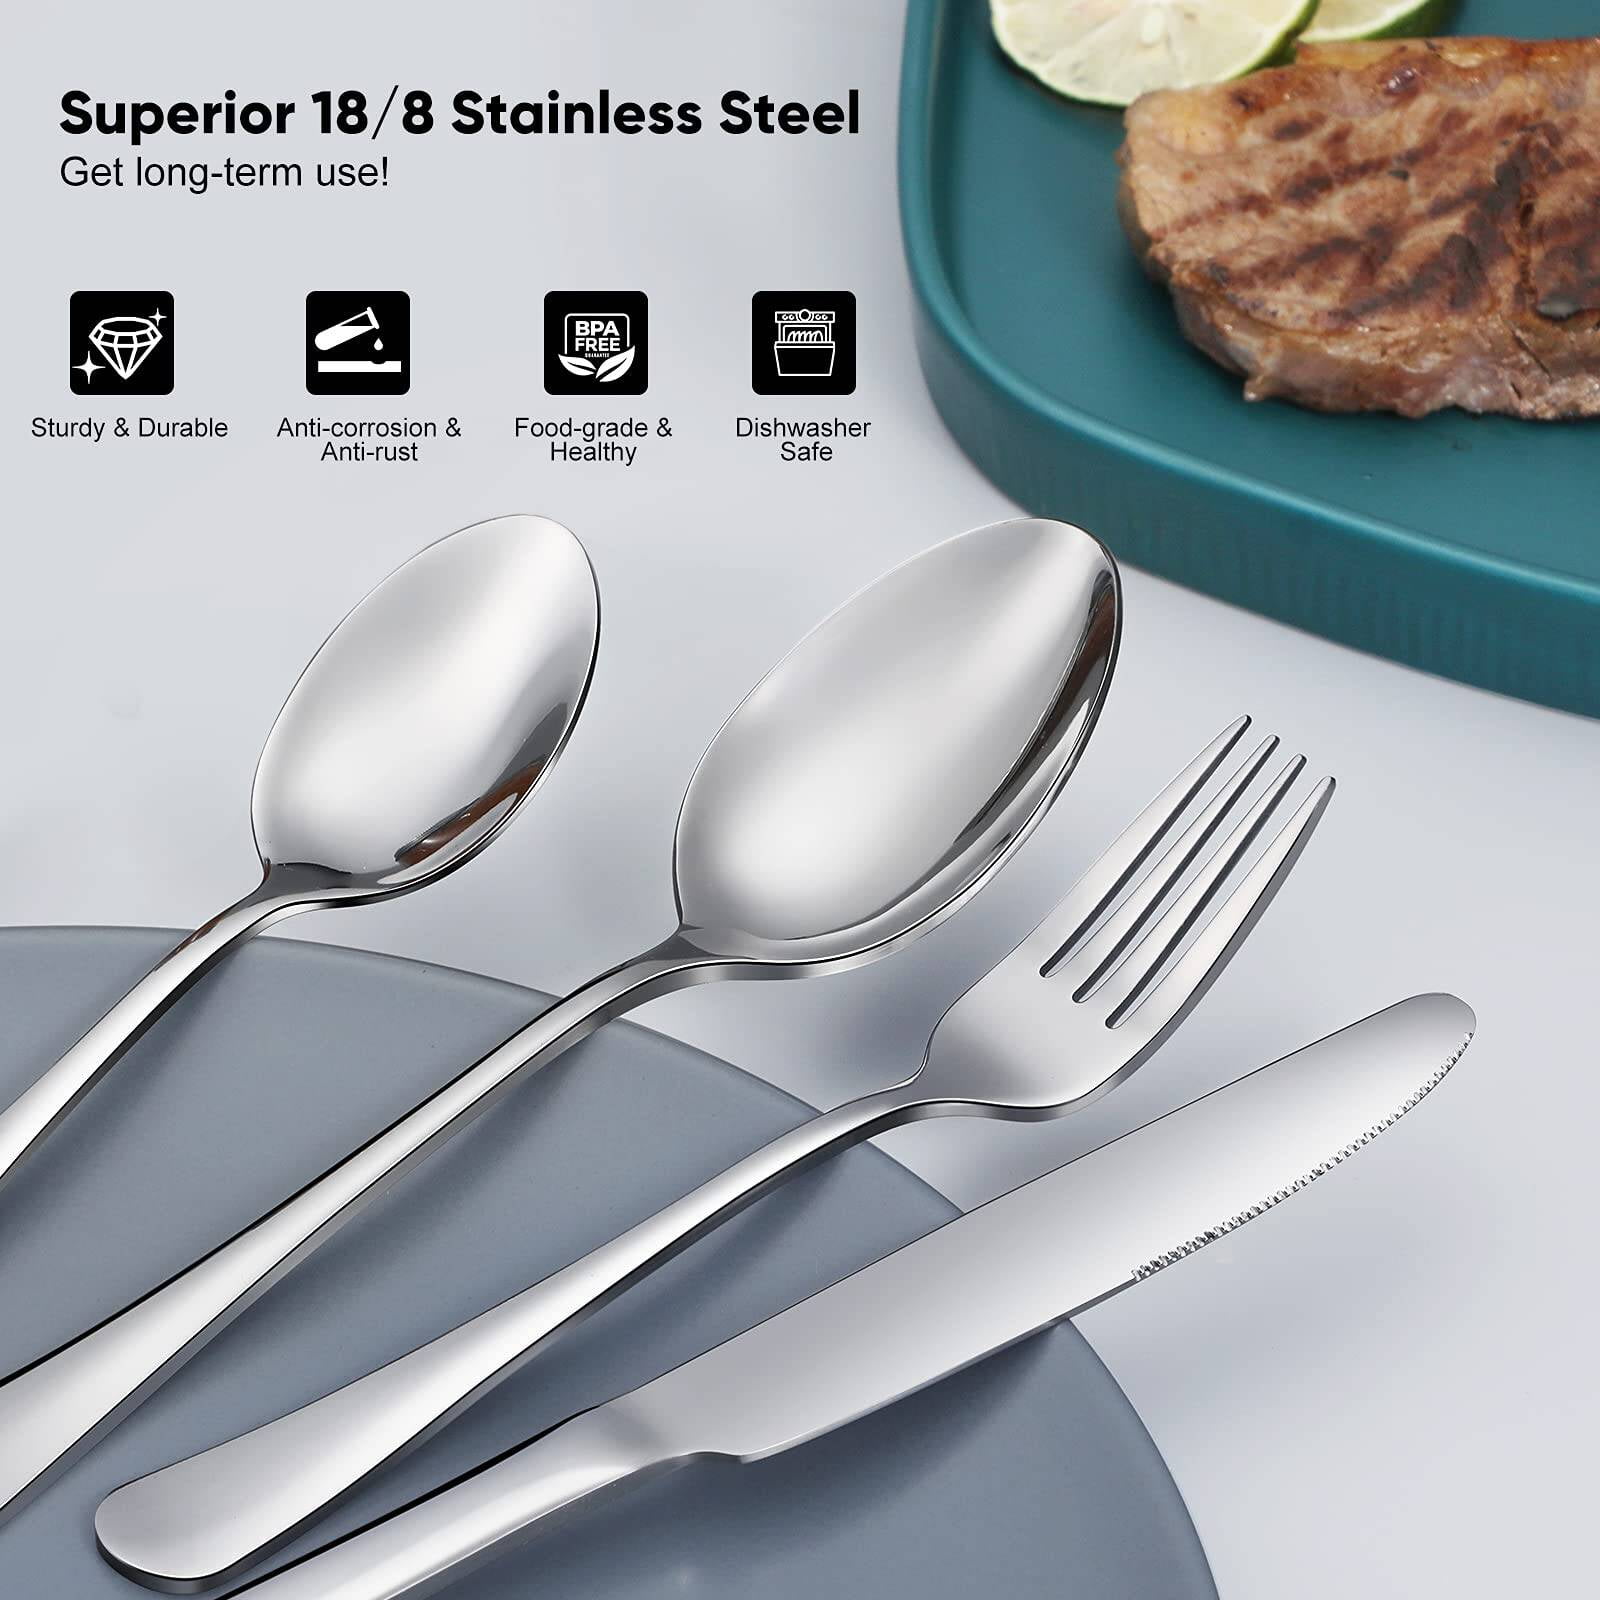 HUNNYCOOK 48 Piece Silverware Set with Steak Knives, Stainless Steel Flatware  Cutlery Set For Home Kitchen Restaurant Hotel, Forks and Spoons Set Service  for 8, Mirror Polished, Dishwasher Safe 